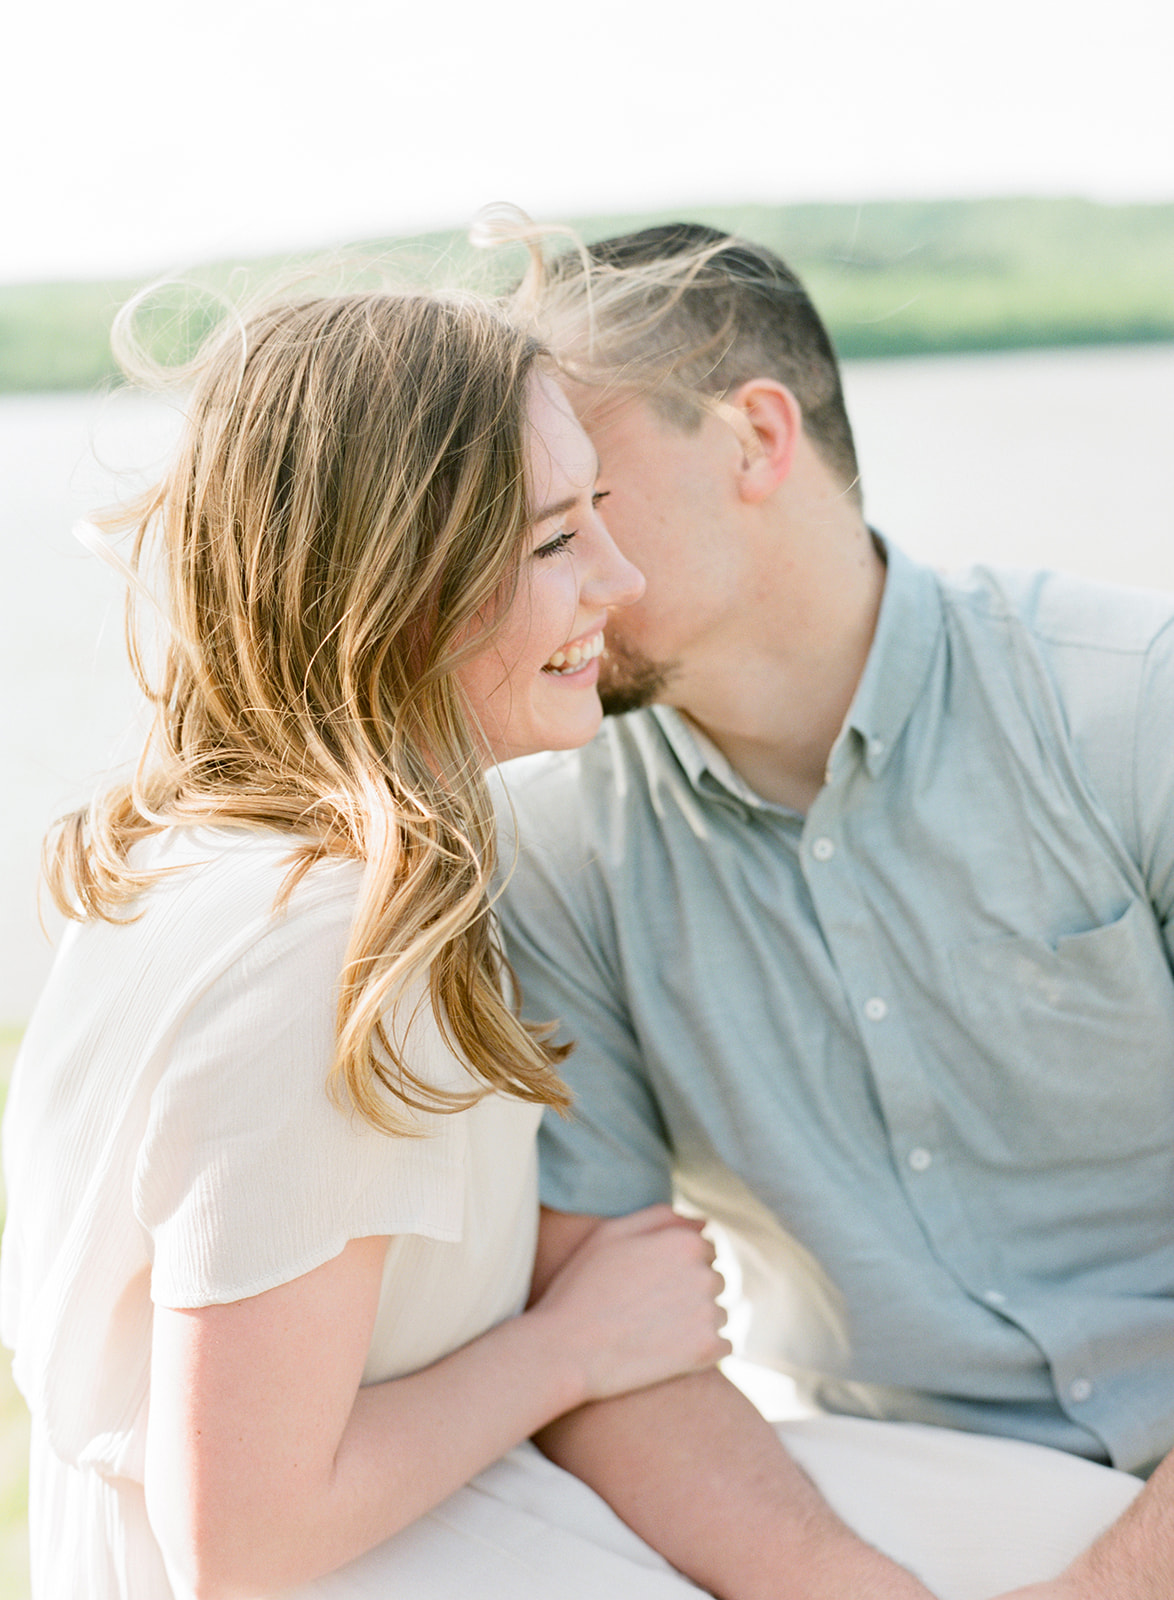 engagement session at okmulgee lake in oklahoma with girl laughing off into the distance while guy whispers into her ear and the sun in shining on their back